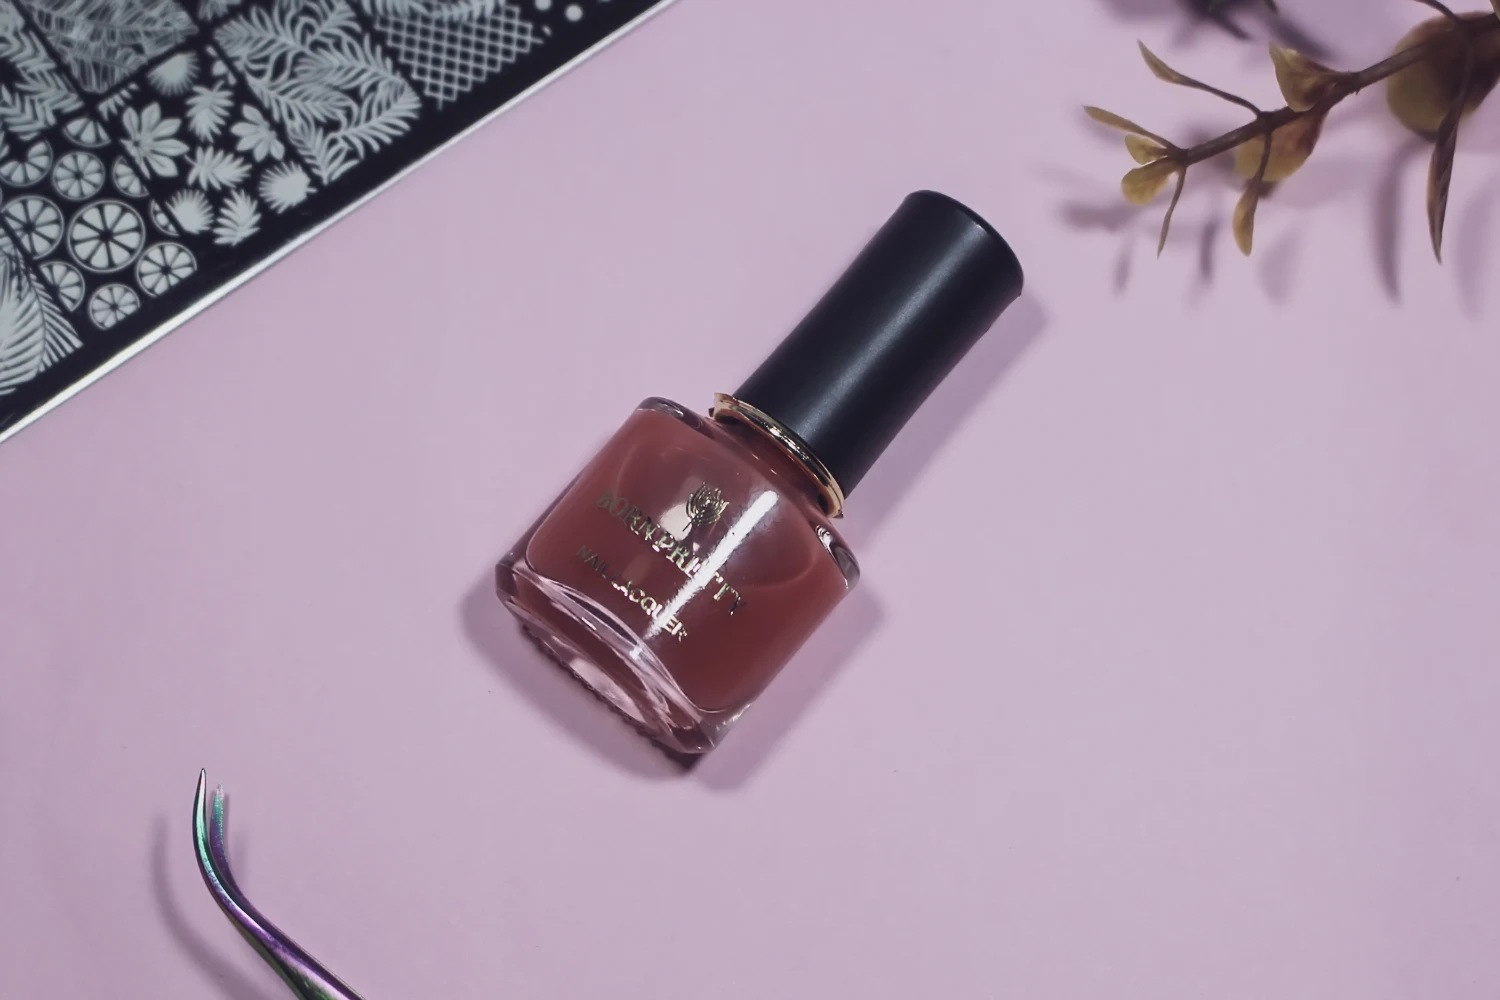 close-up of a nail polish bottle with a strawberry nail polish on a pink background